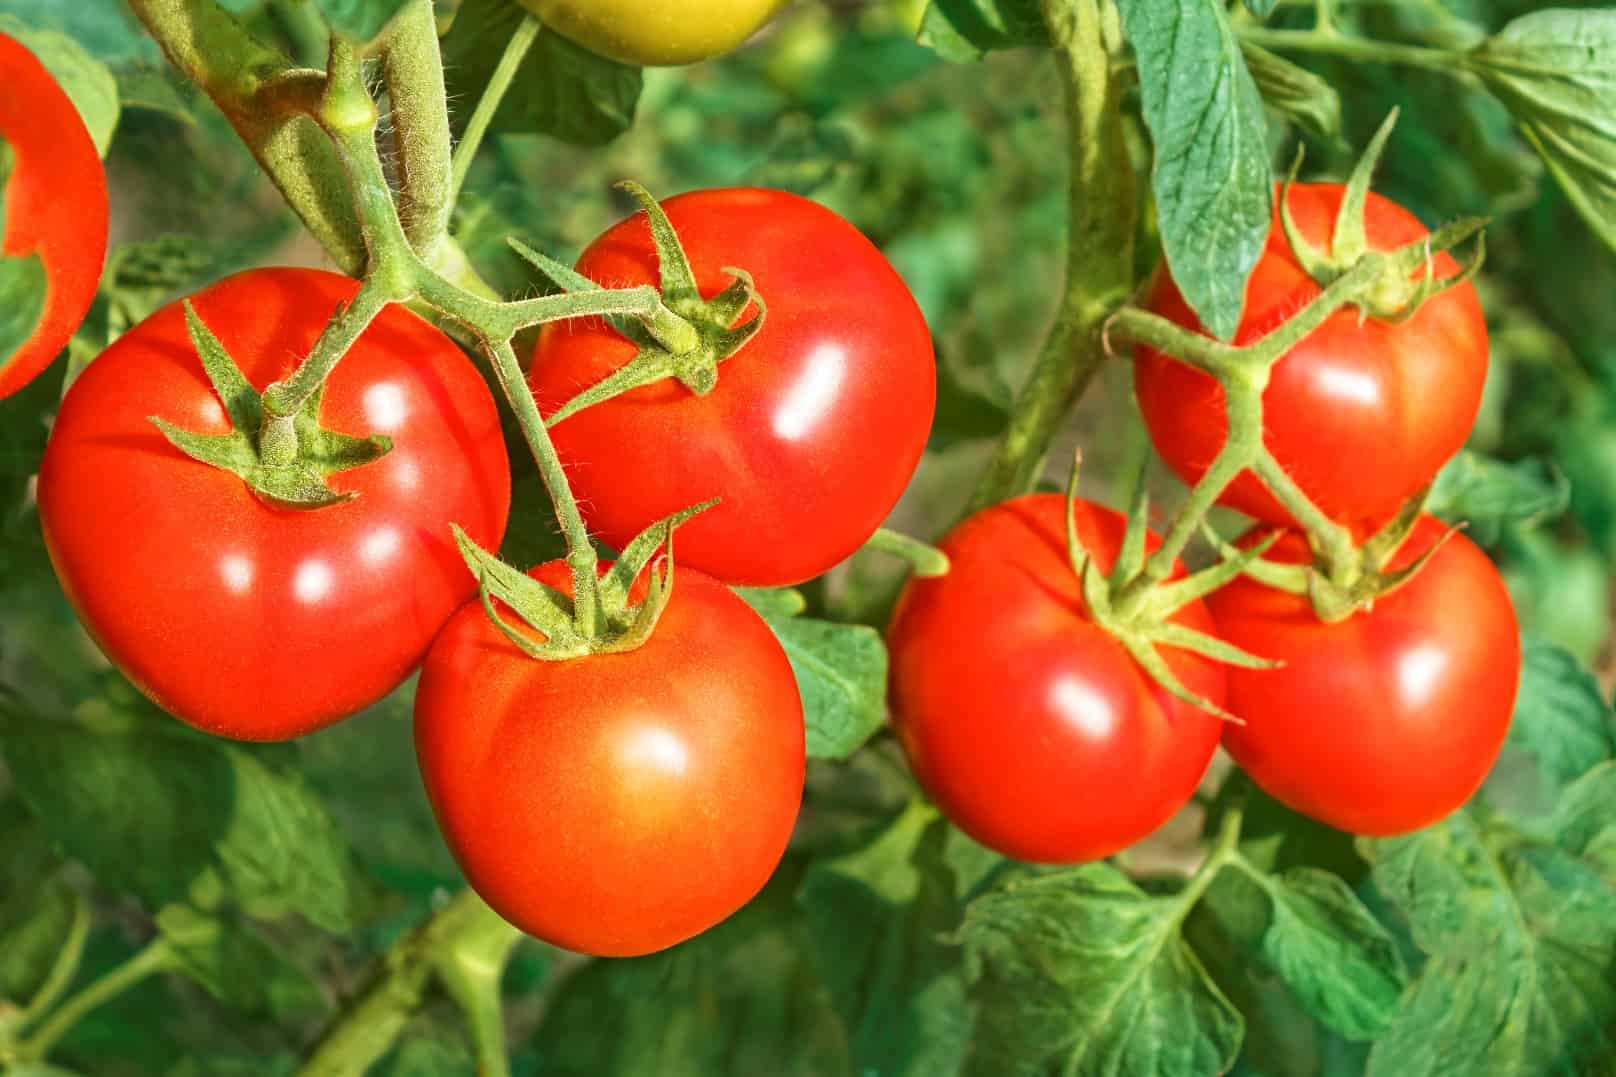 Tomatoes are a popular vegetable grown in container gardening